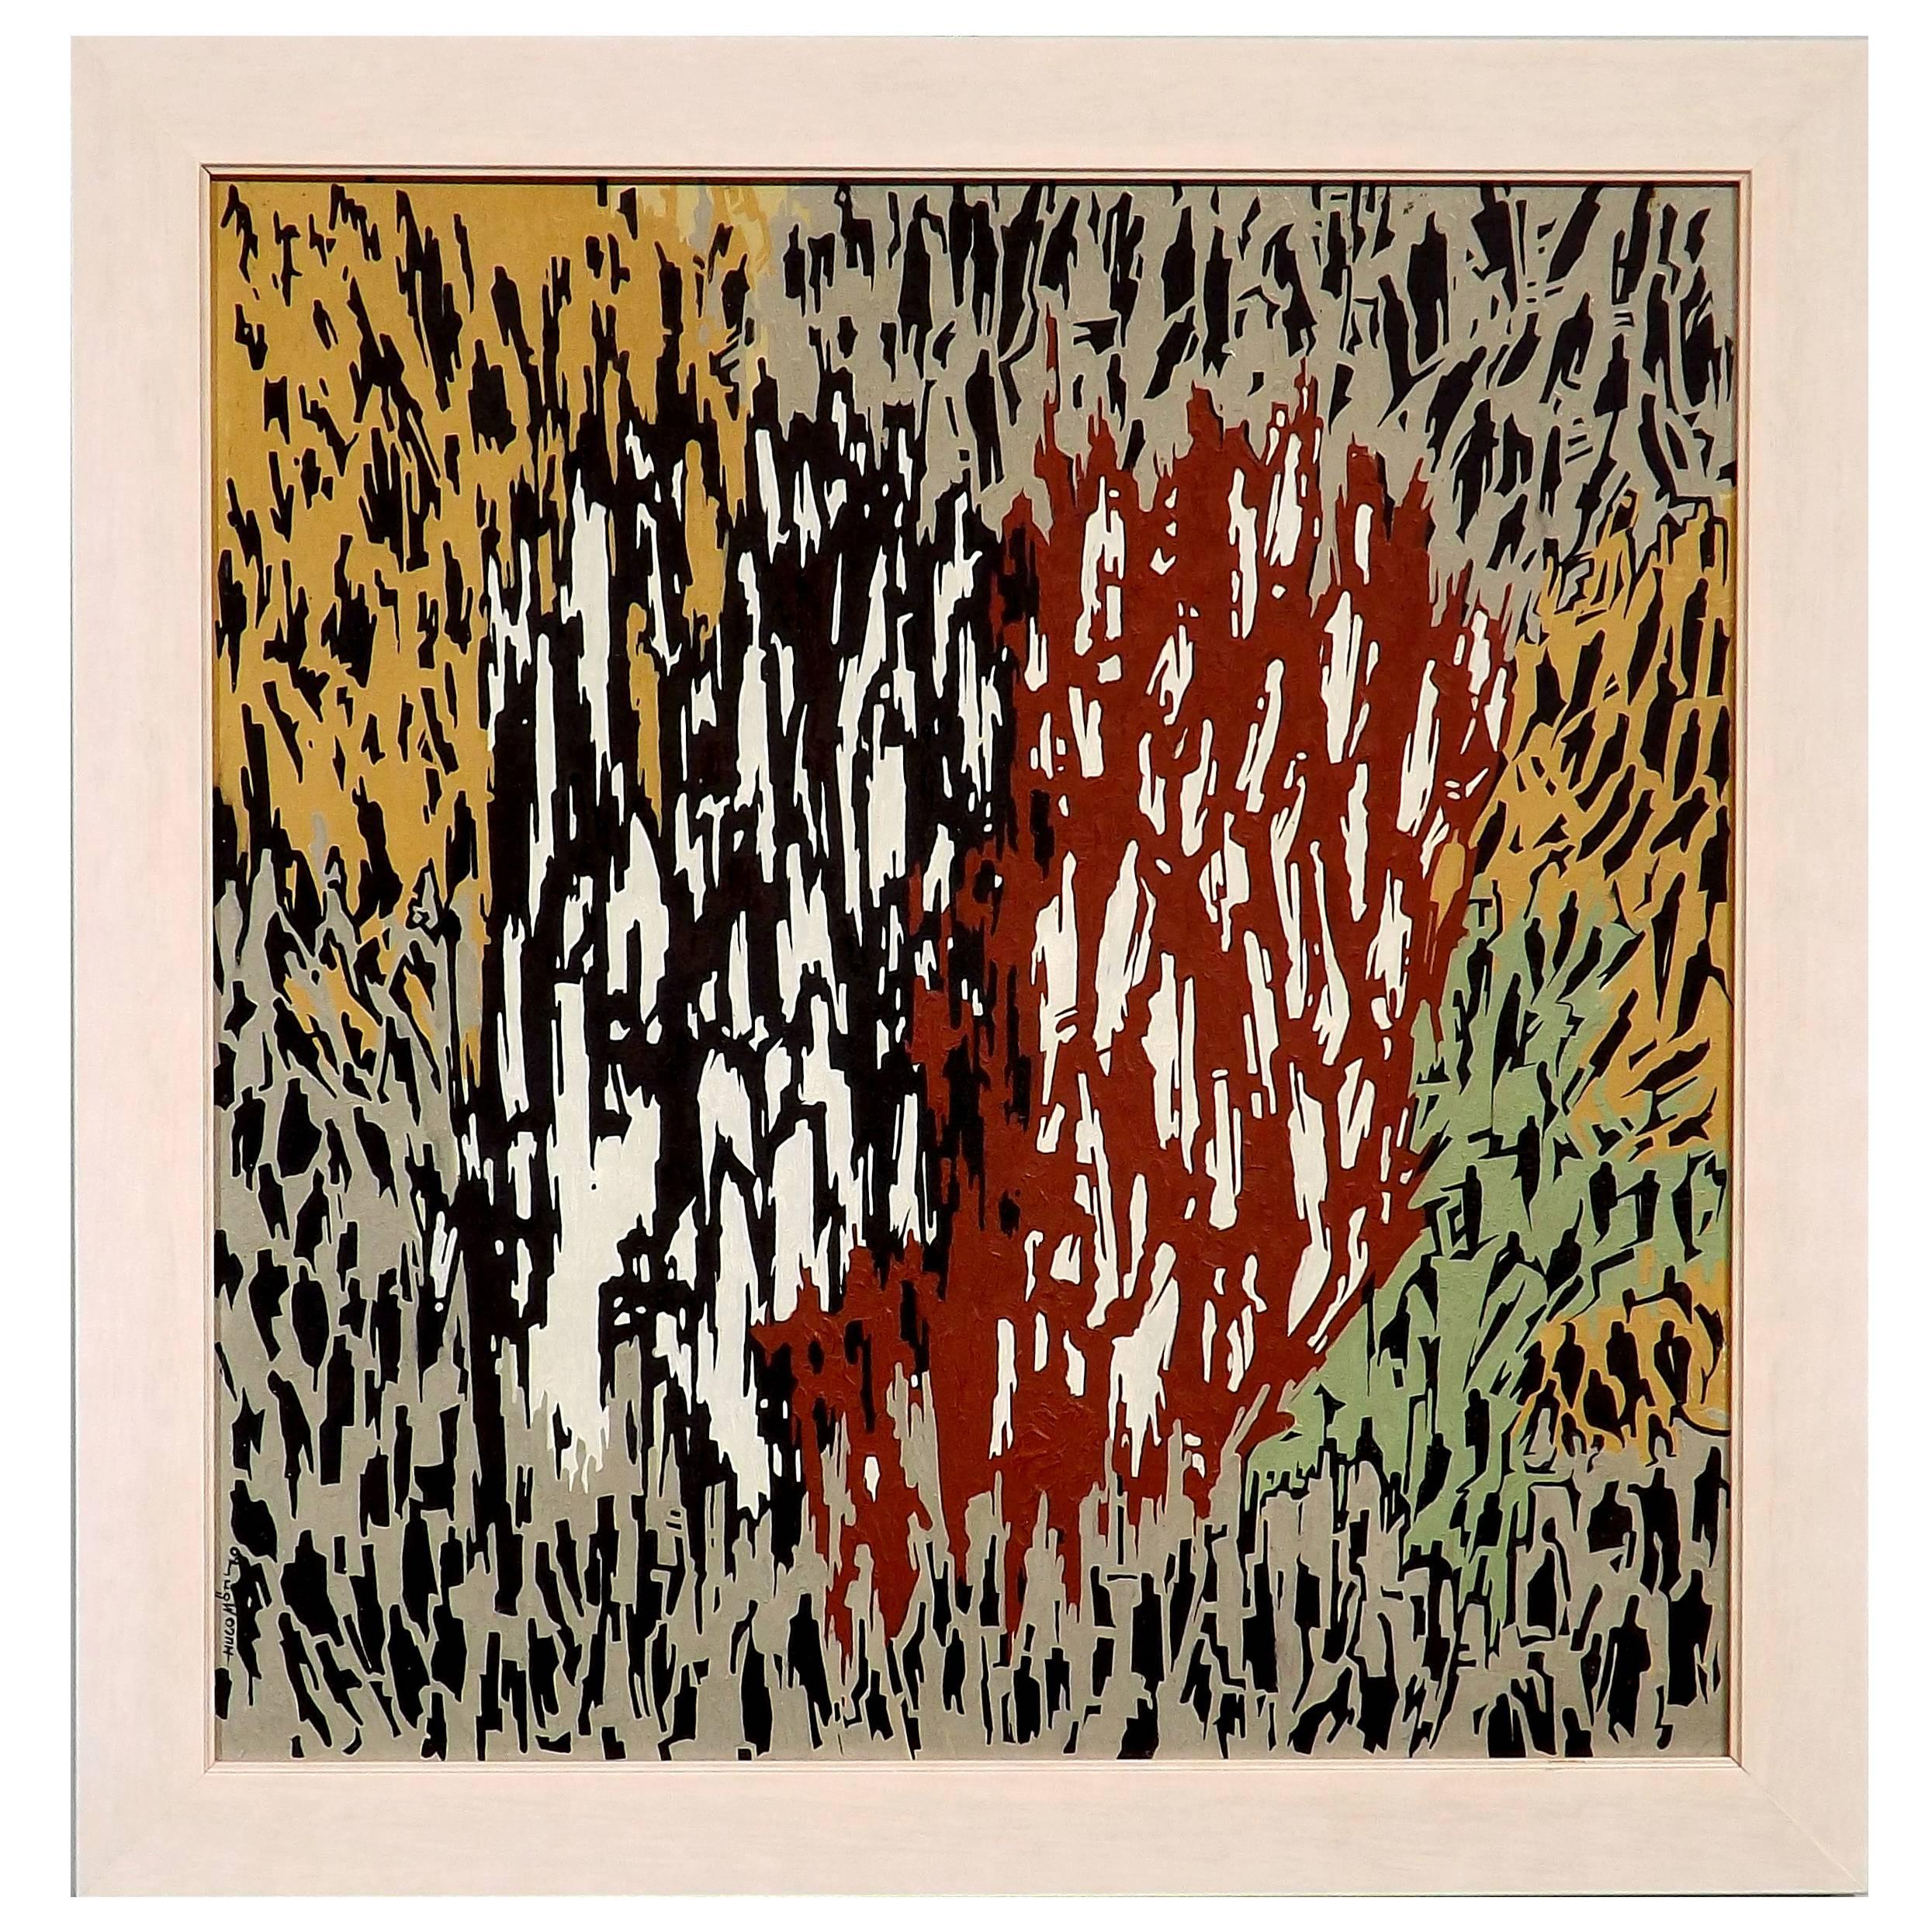 Hugo Mohl 'Filigran' Midcentury Abstract Painting, Dated 1960